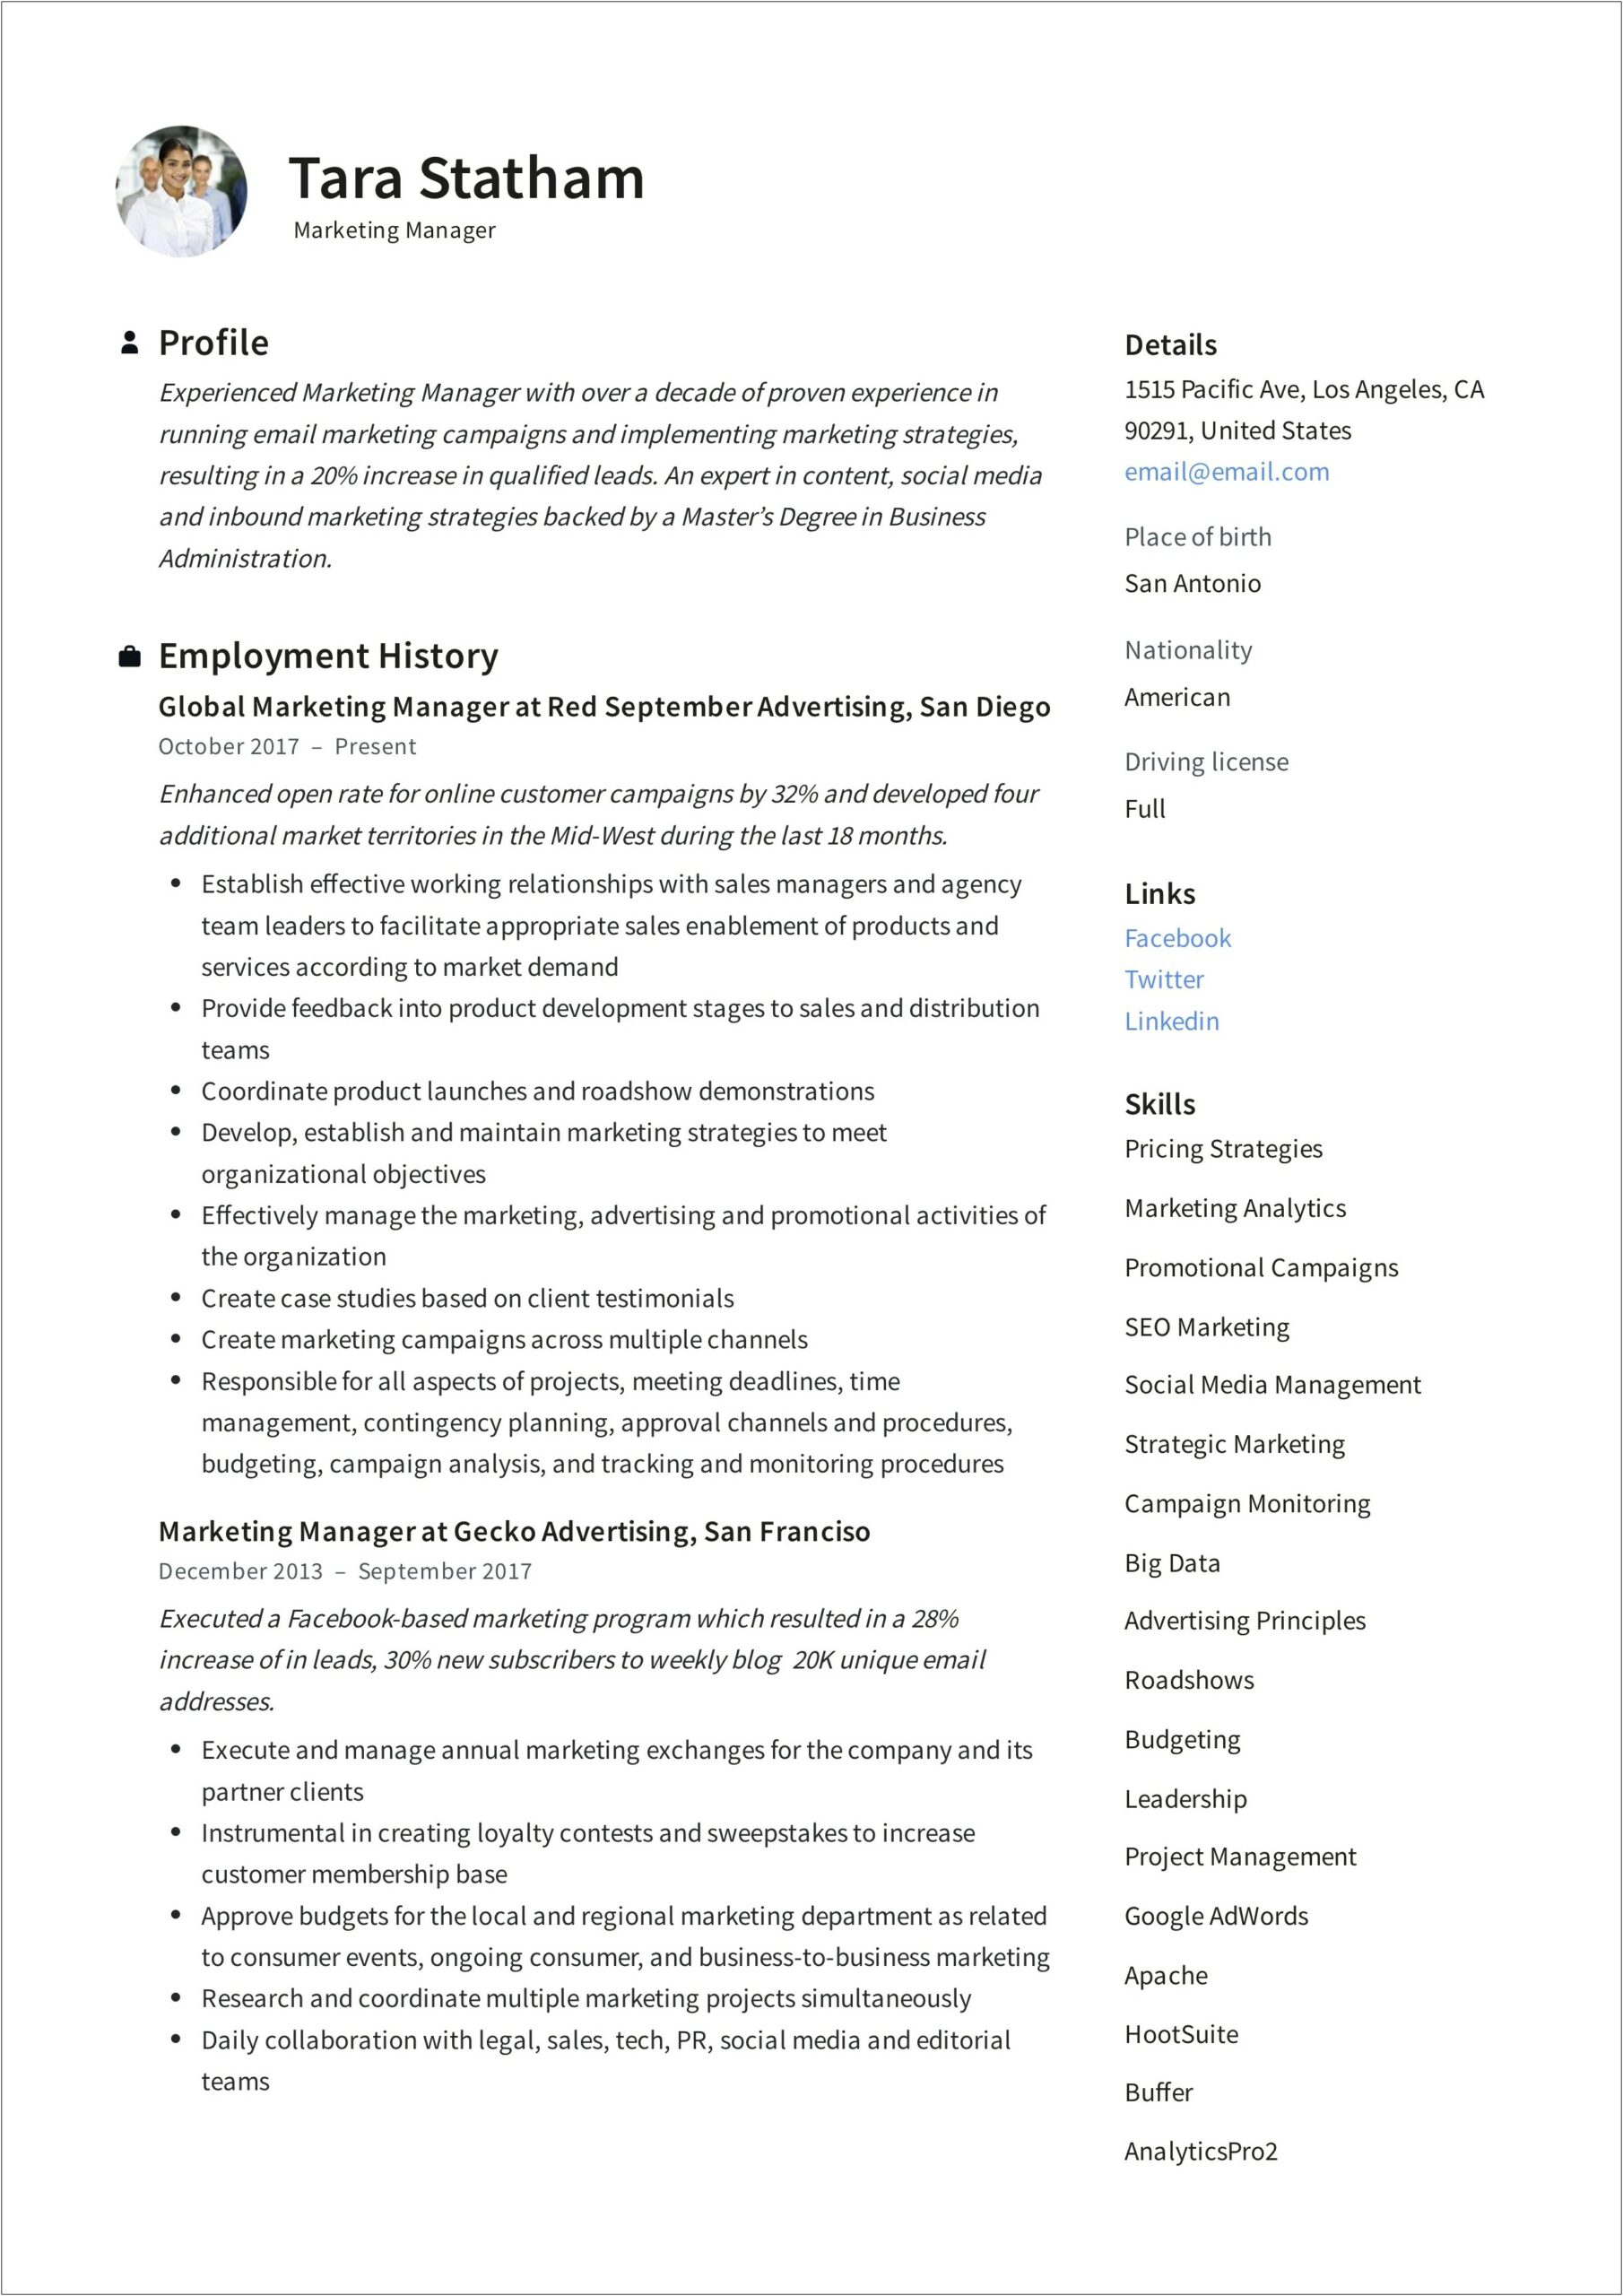 Resume Example For Experience Marketing Manager